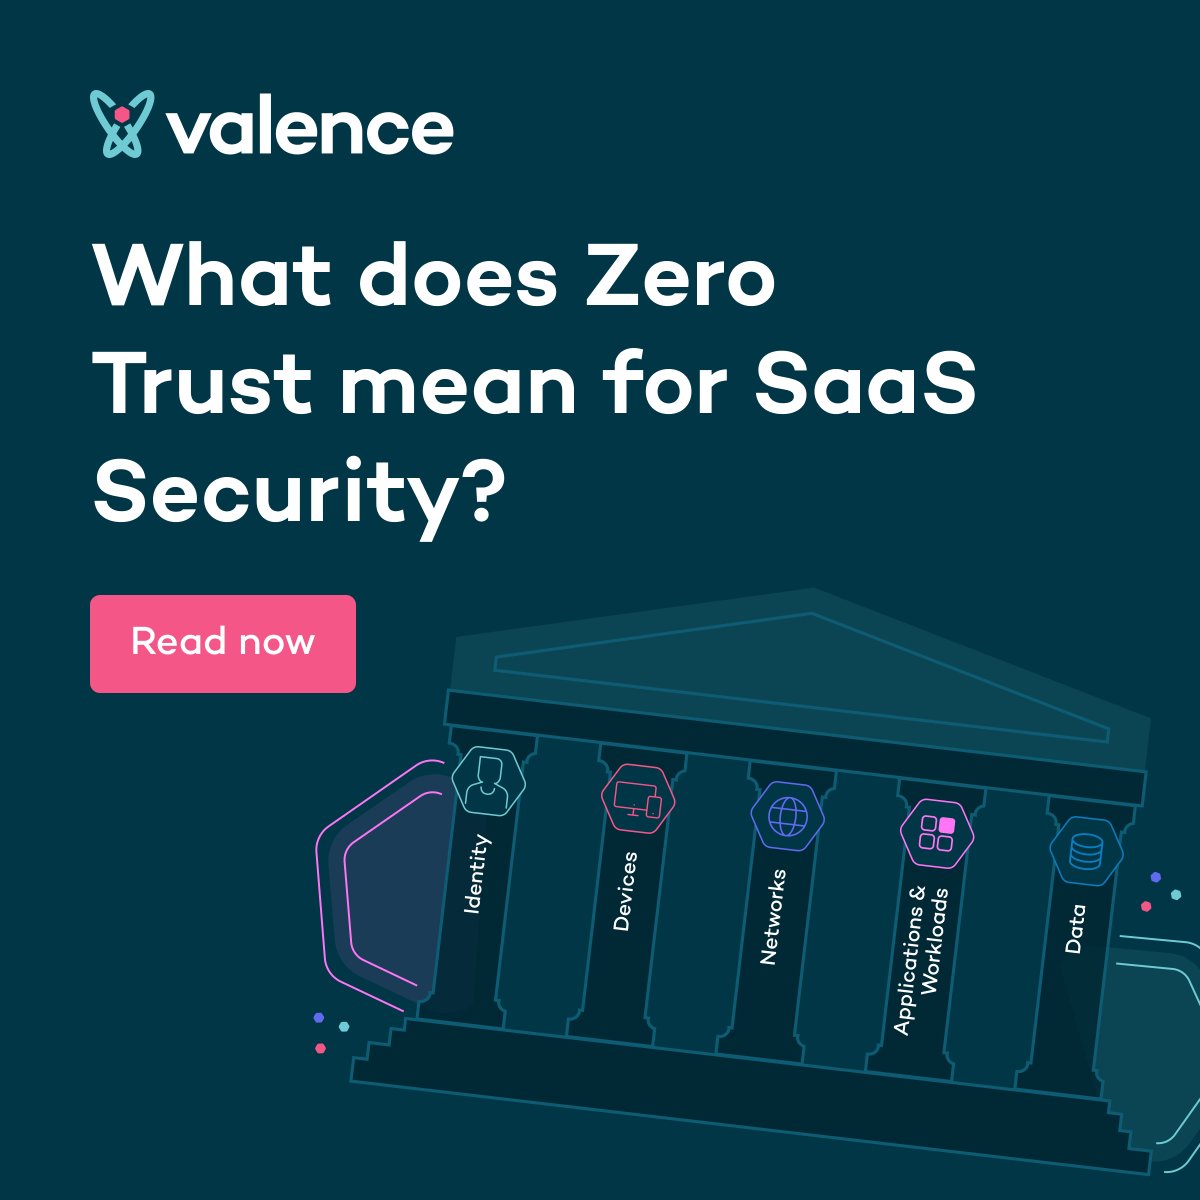 You’ve heard a lot about #zerotrust, but did you know that most SaaS applications are well-aligned with #ZeroTrustArchitecture? If you’re planning to start adopting Zero Trust in your organization, SaaS is an ideal place to start. Read here: hubs.ly/Q023Dlw50